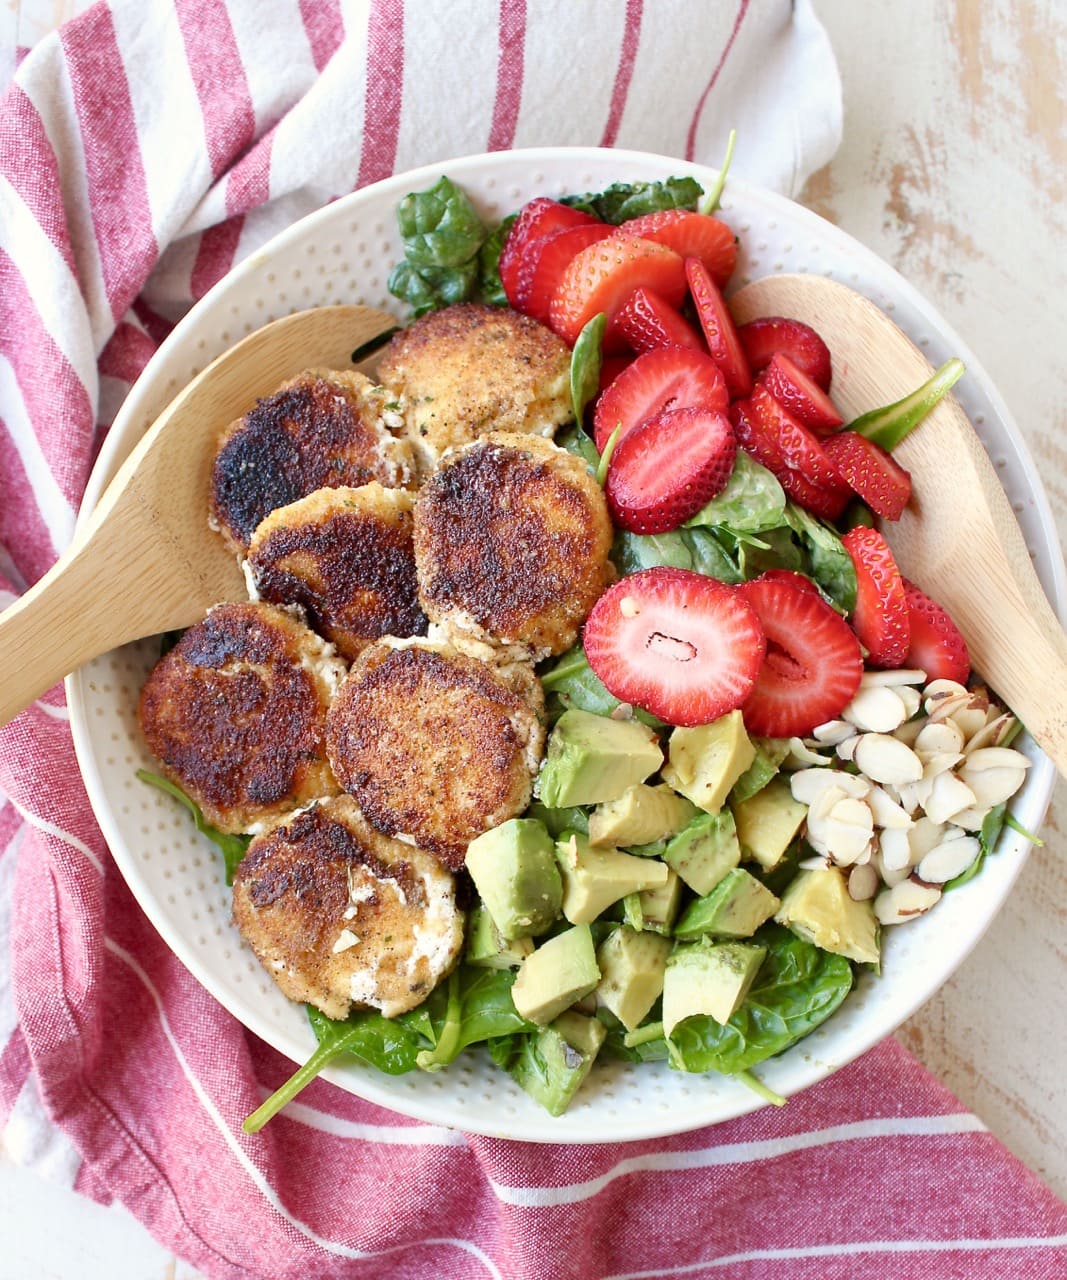 Crispy goat cheese, creamy avocado & juicy strawberries top spinach & arugula, tossed with avocado vinaigrette, for the perfect vegetarian Spring salad!